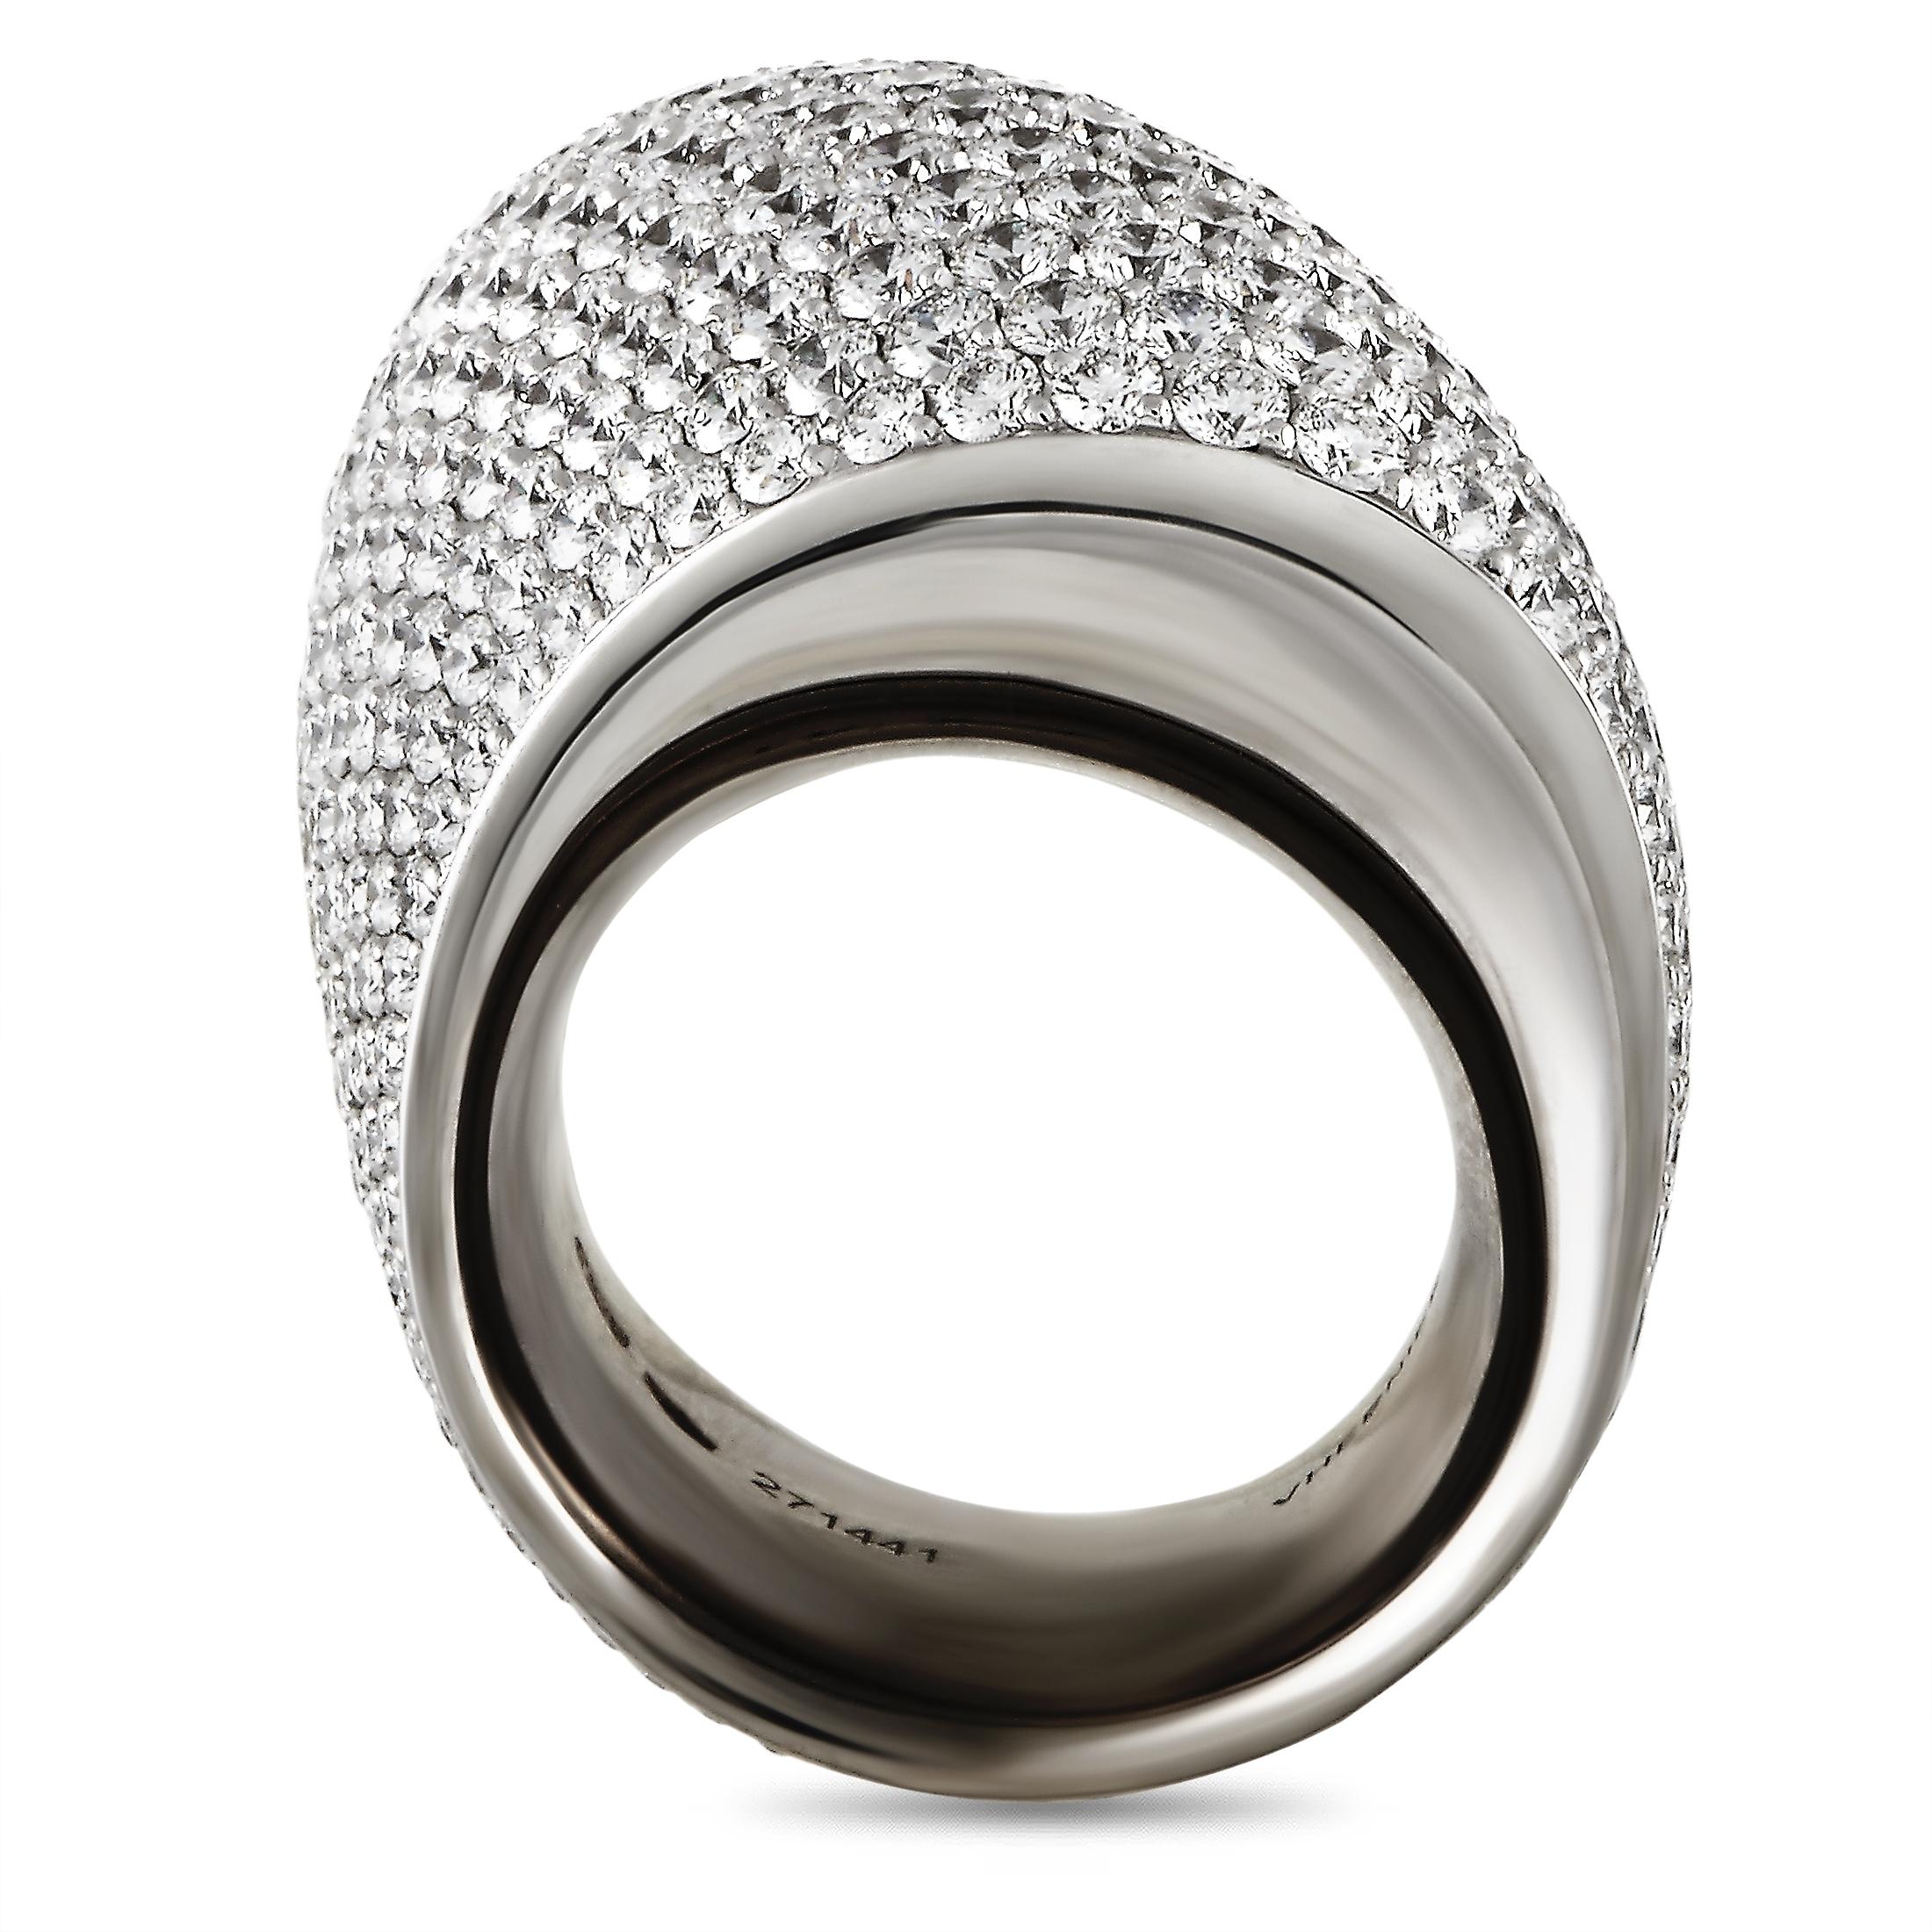 The Vhernier “Tonneau” ring is made of 18K white gold and embellished with diamonds that amount to 9.52 carats. The ring weighs 20.5 grams and boasts band thickness of 20 mm and top height of 11 mm, while top dimensions measure 20 by 27 mm.
Ring